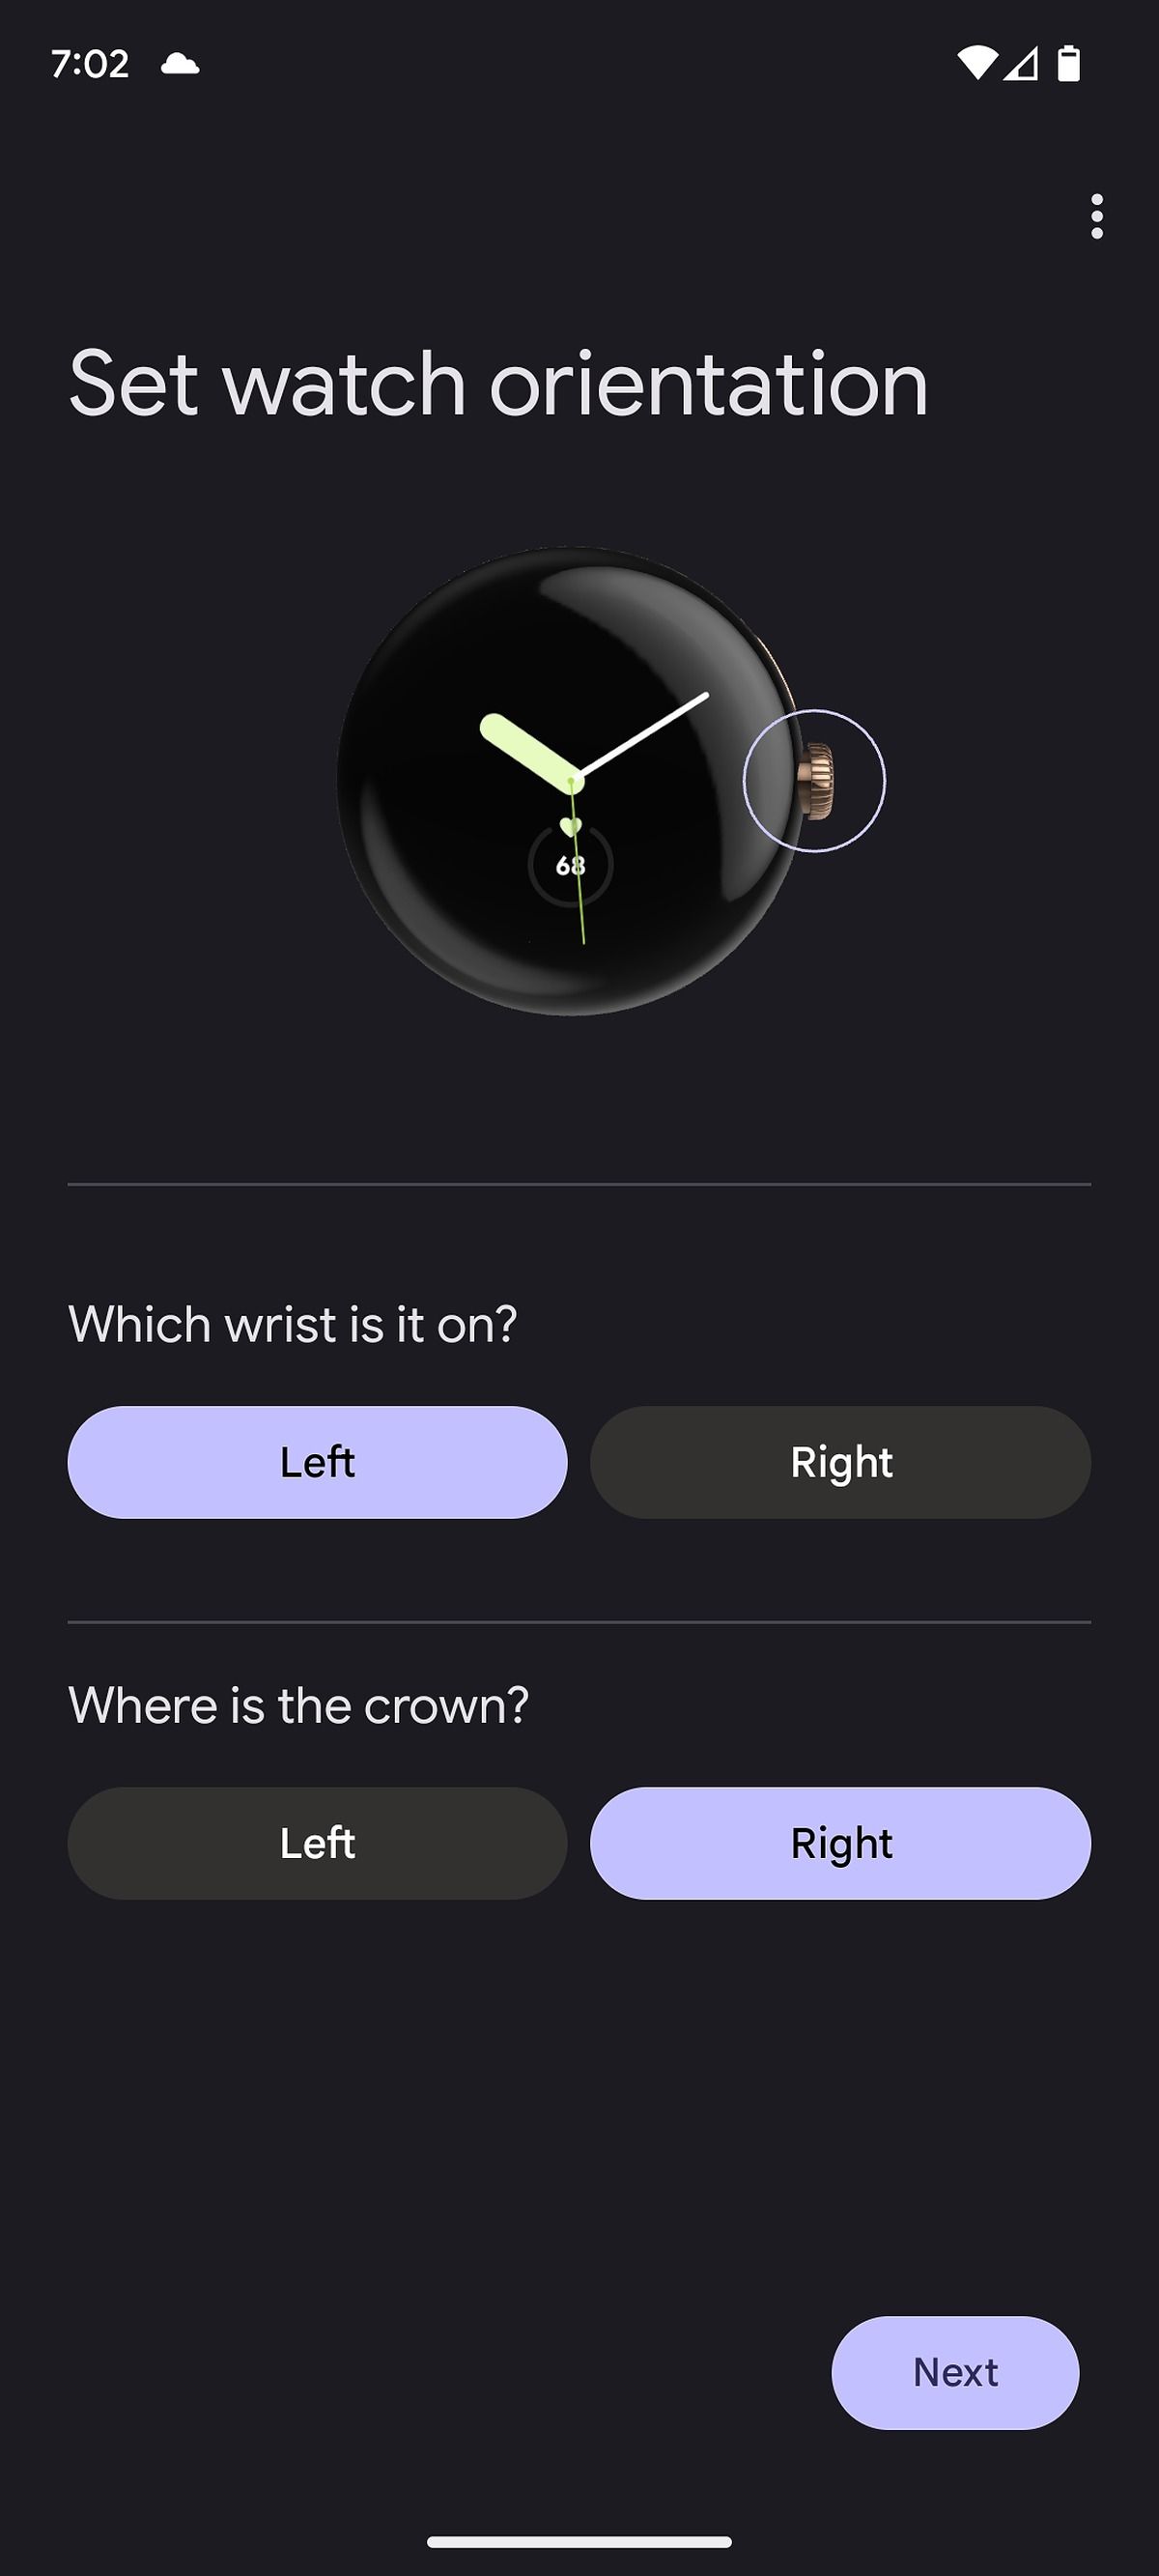 Selecting your arm and crown direction options on a Pixel Watch, with Left and Right set respectively.